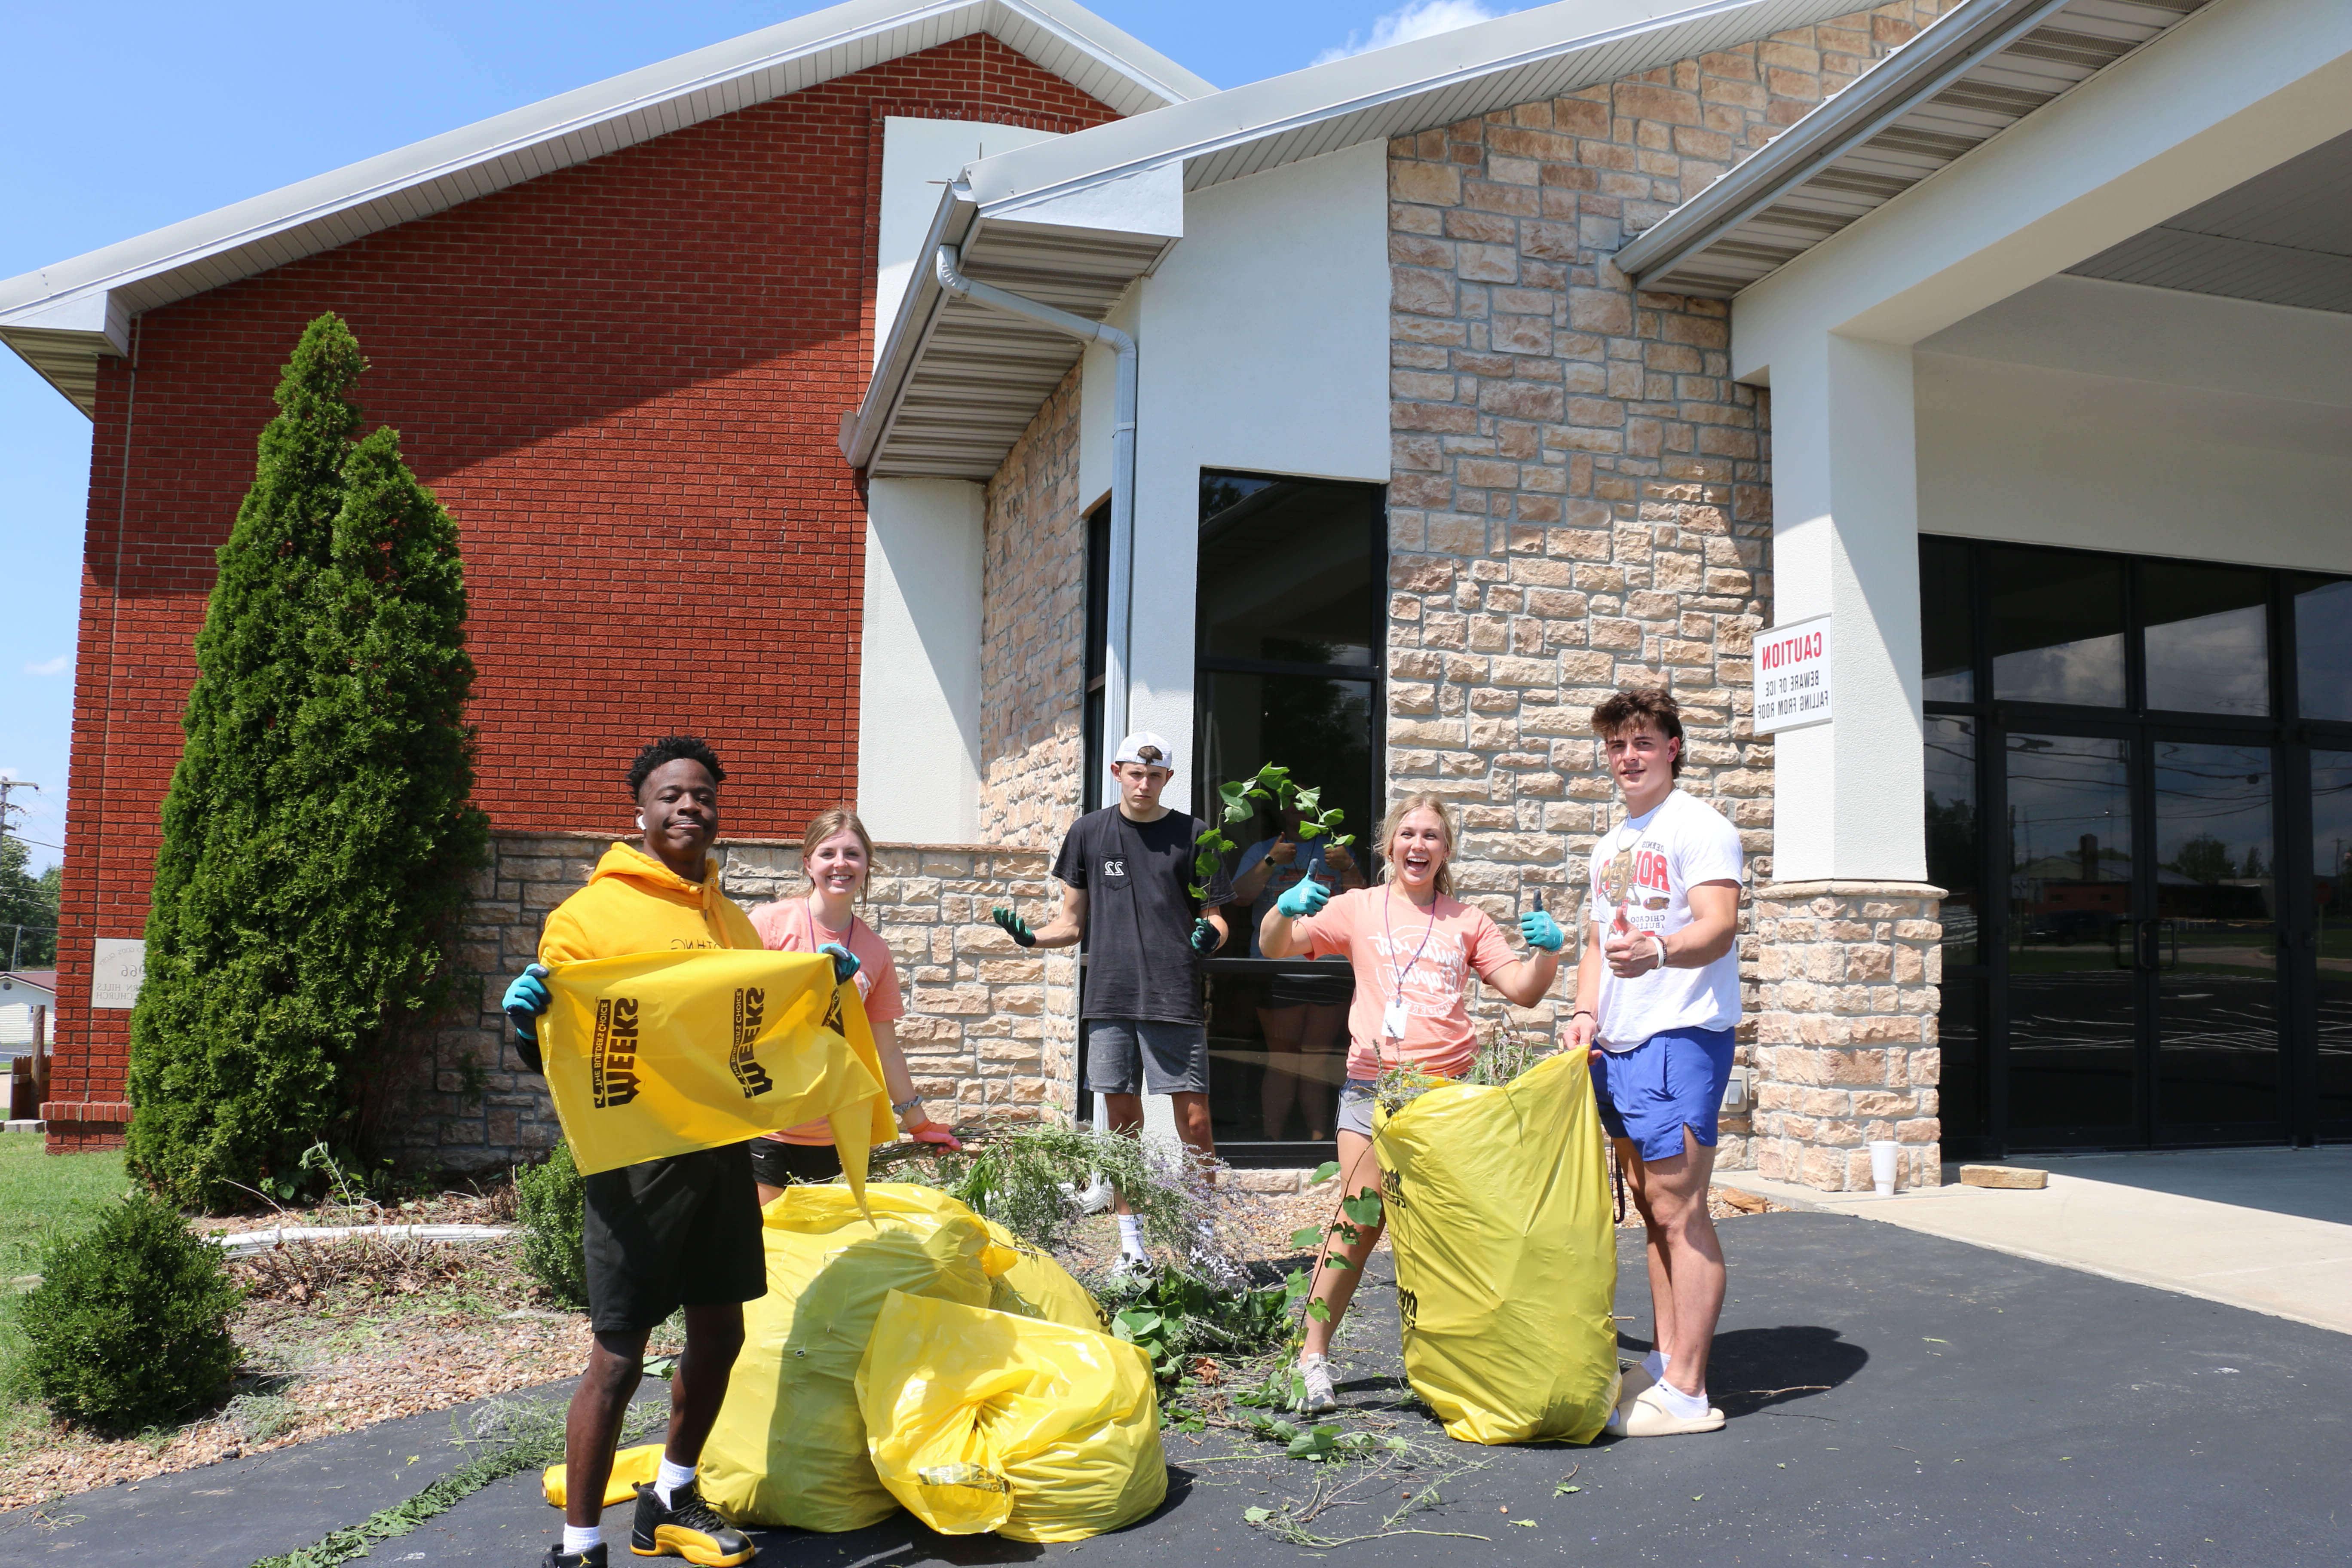 group of students poses for picture holding yellow bags and working on pulling weeds outside church building